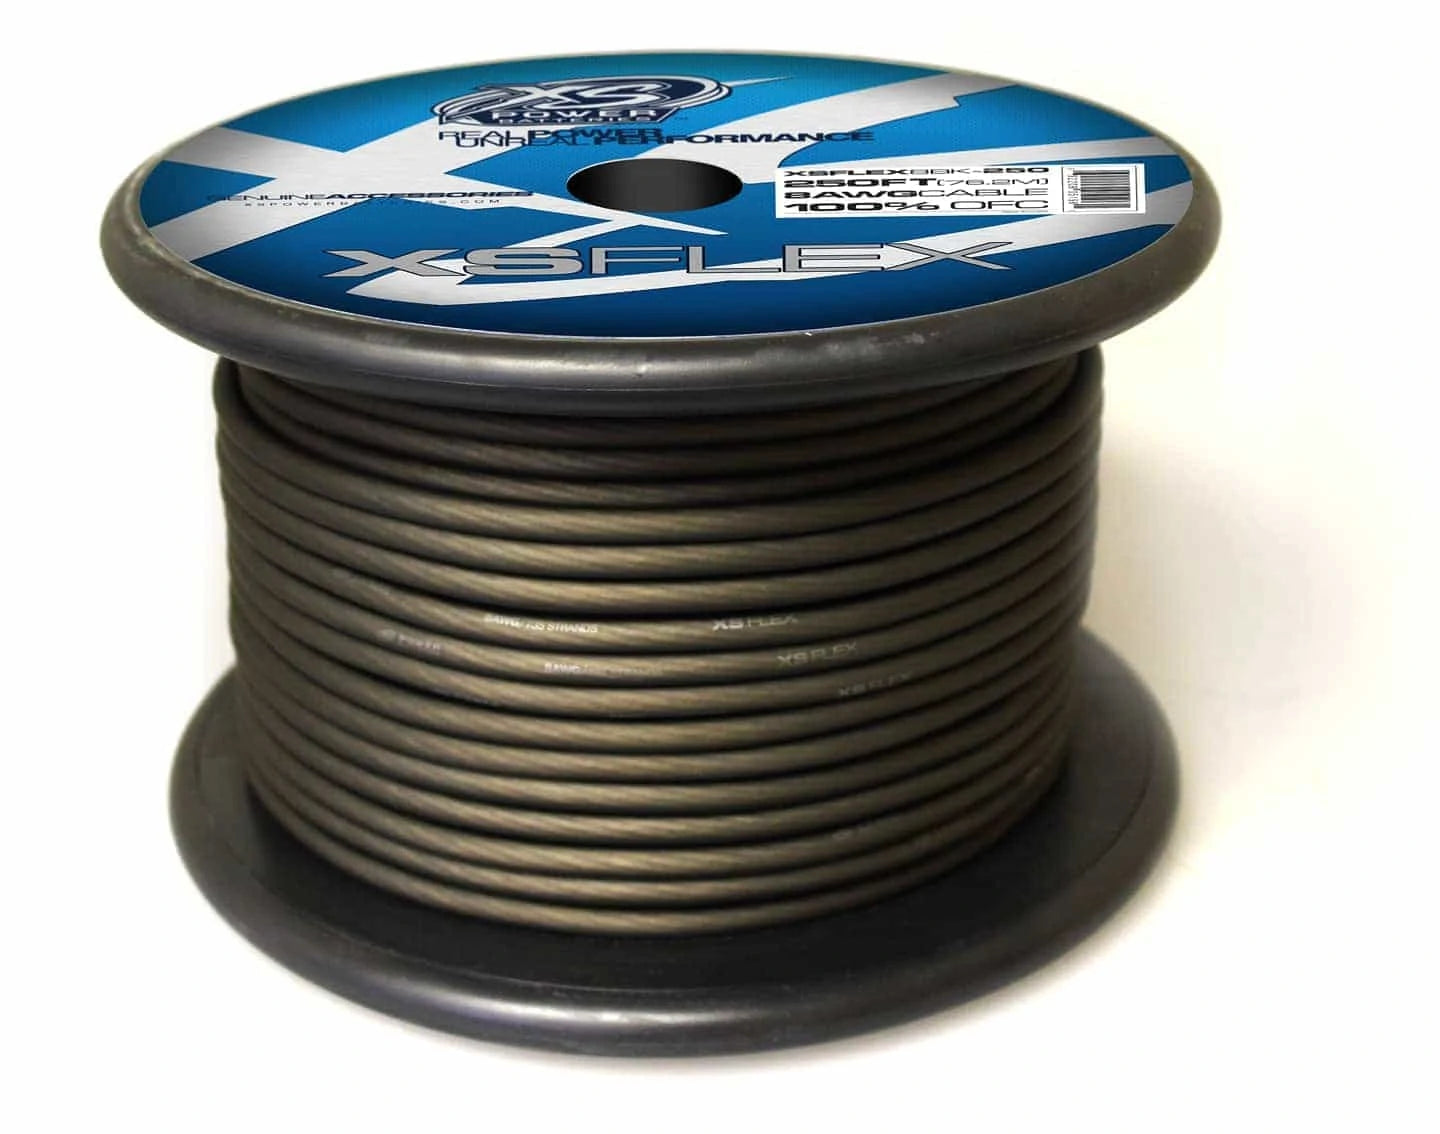 XS Power 8 AWG Gauge XS Flex 100% Oxygen Free Tinned Copper Power and Ground Cable 250ft spool